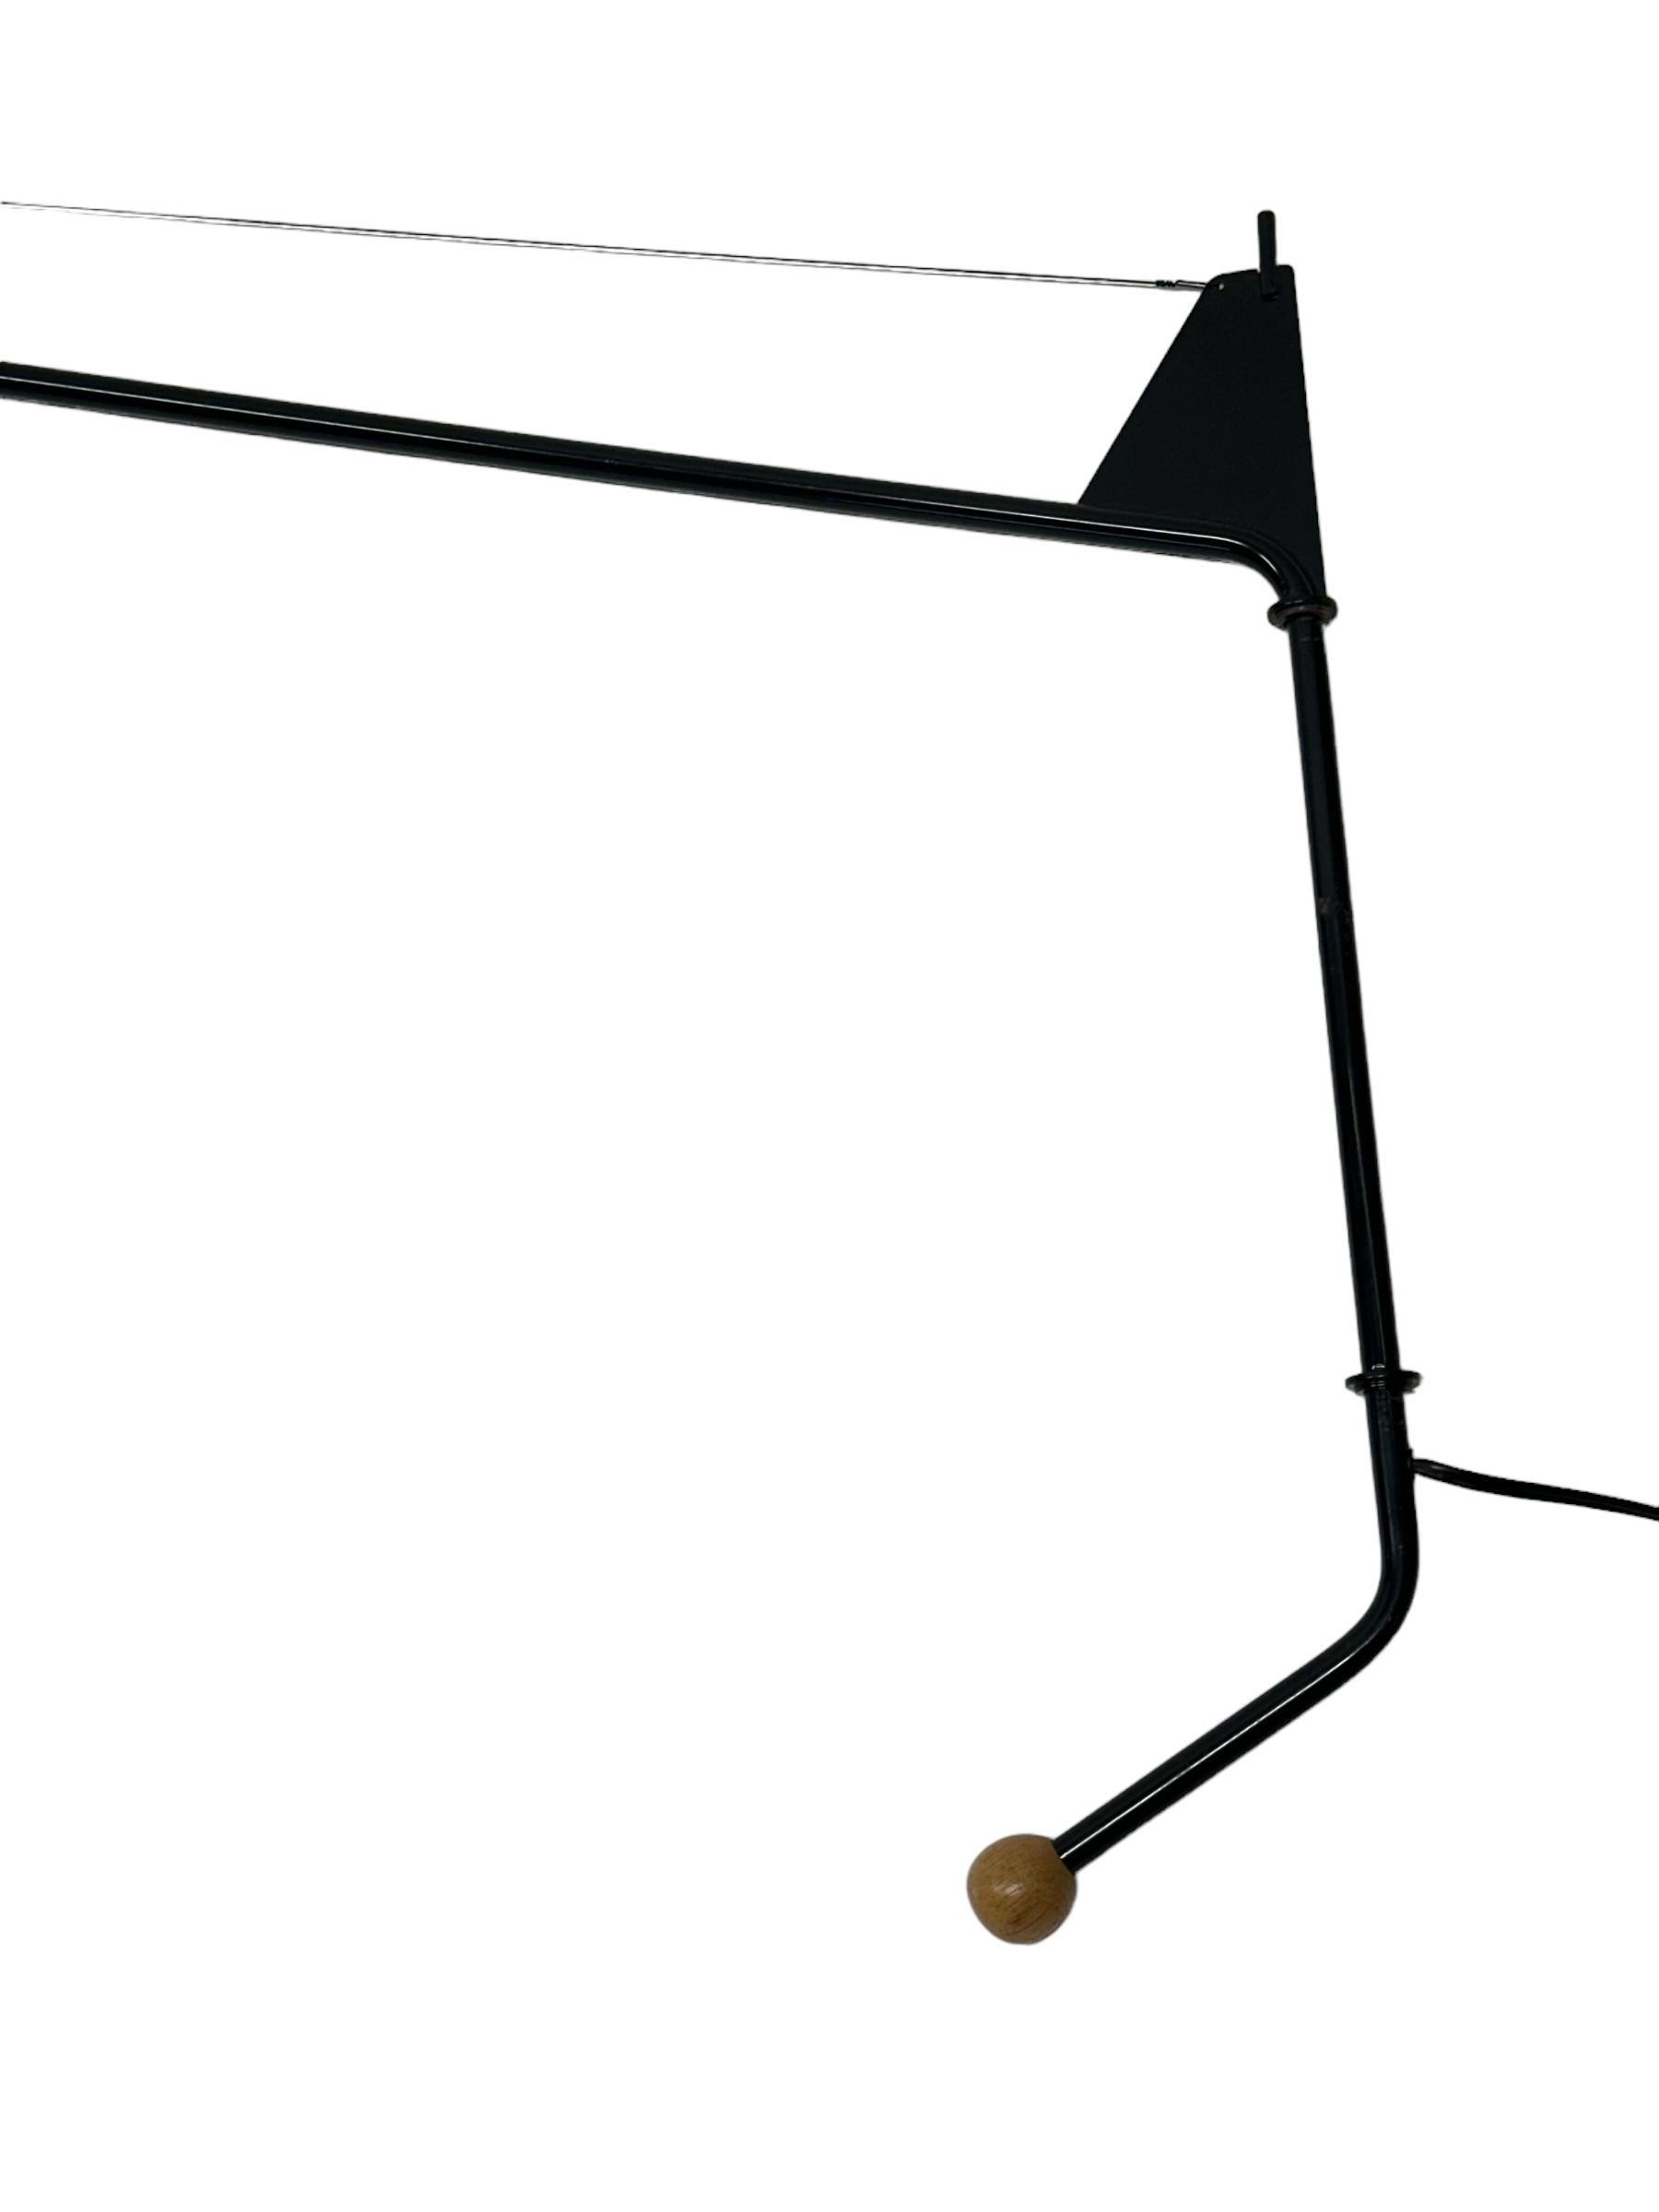 Jean Prouvé Potence Wall Lamp by Vitra For Sale 2